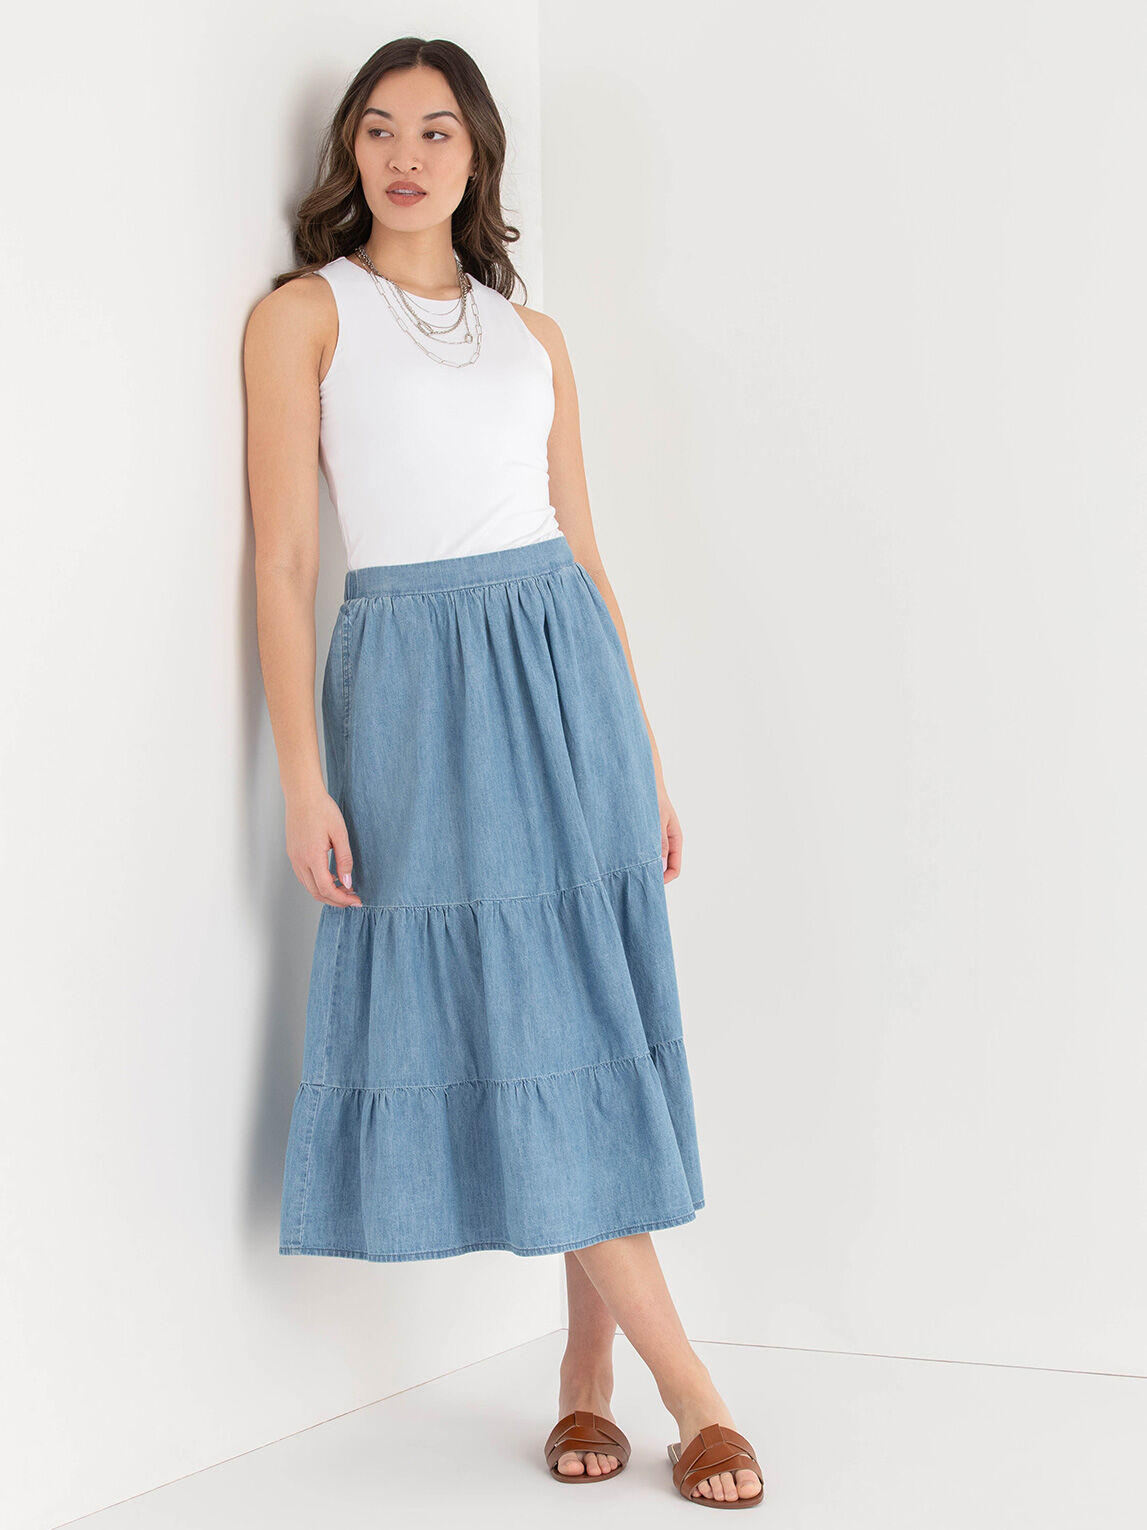 THE TIFFANY TIERED TENCEL SKIRT IN LIGHT WASH – Pink Desert